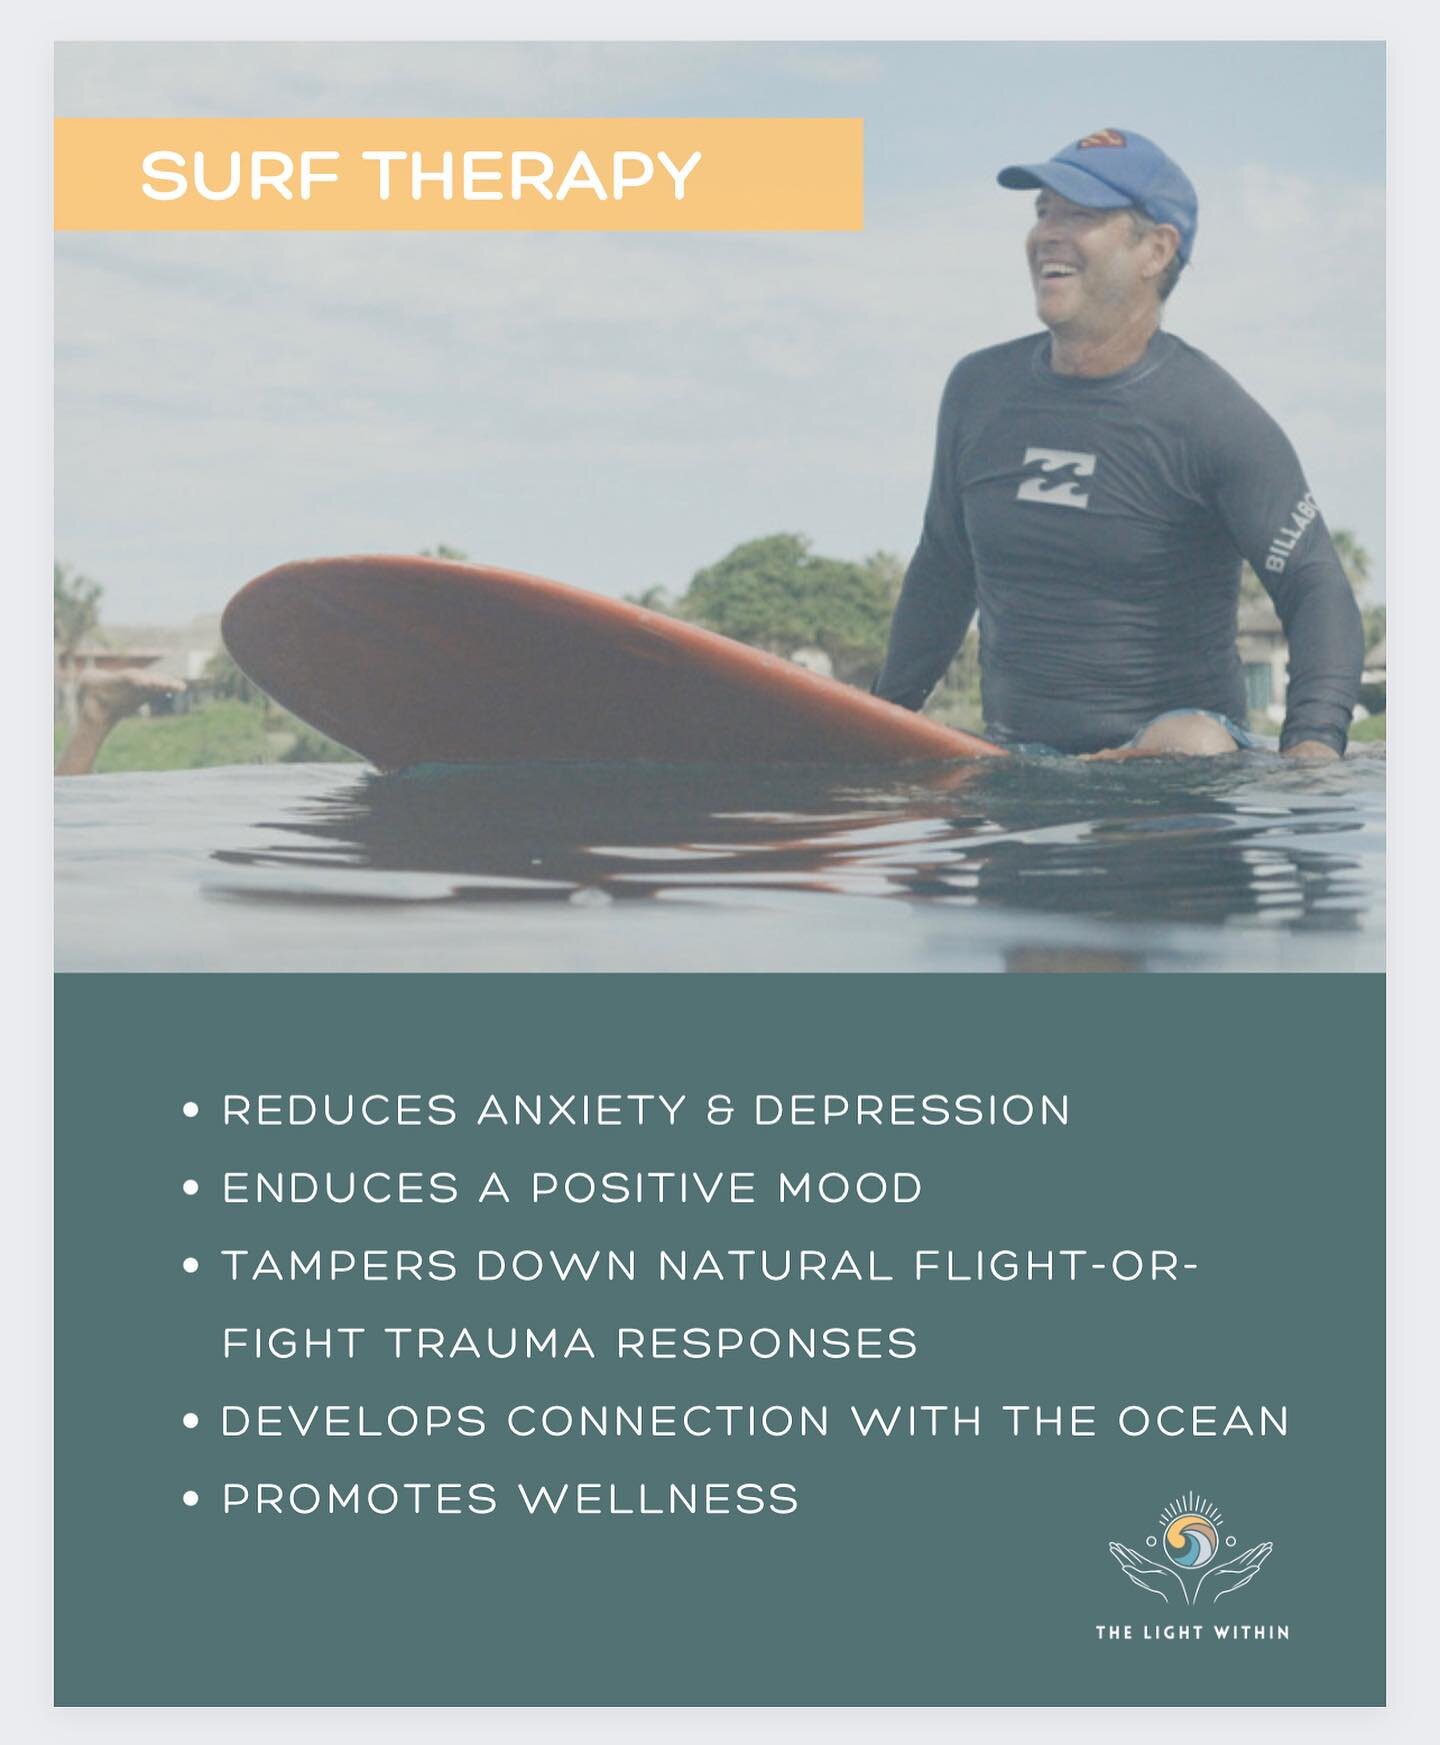 Surf therapy &mdash; as a form of outdoor / adventure therapy is recognized worldwide as a means of treating a variety of mental health issues. Our carefully curated programs include surf therapy combined with other holistic modalities such as hiking